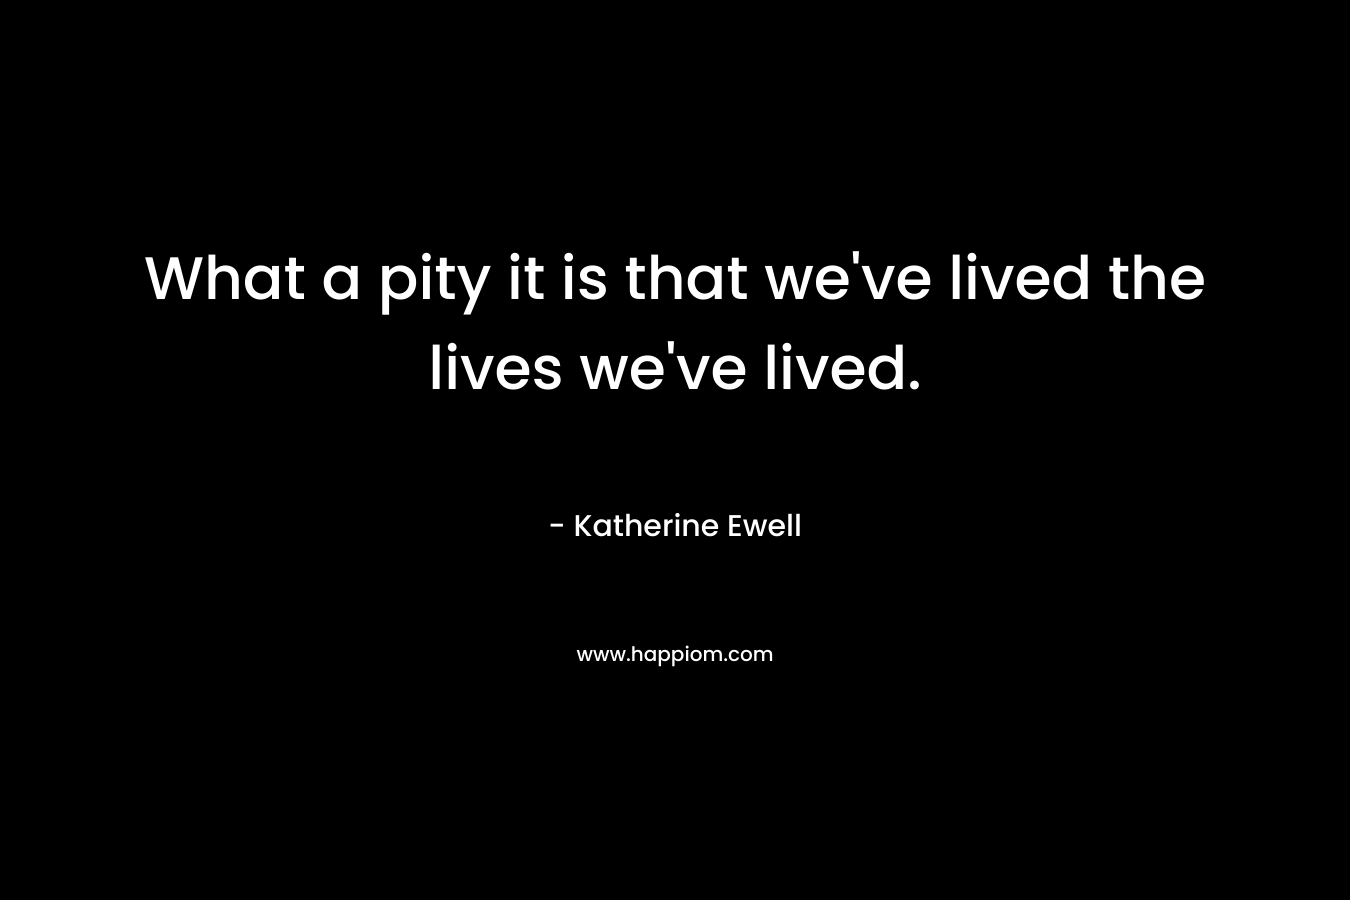 What a pity it is that we’ve lived the lives we’ve lived. – Katherine Ewell